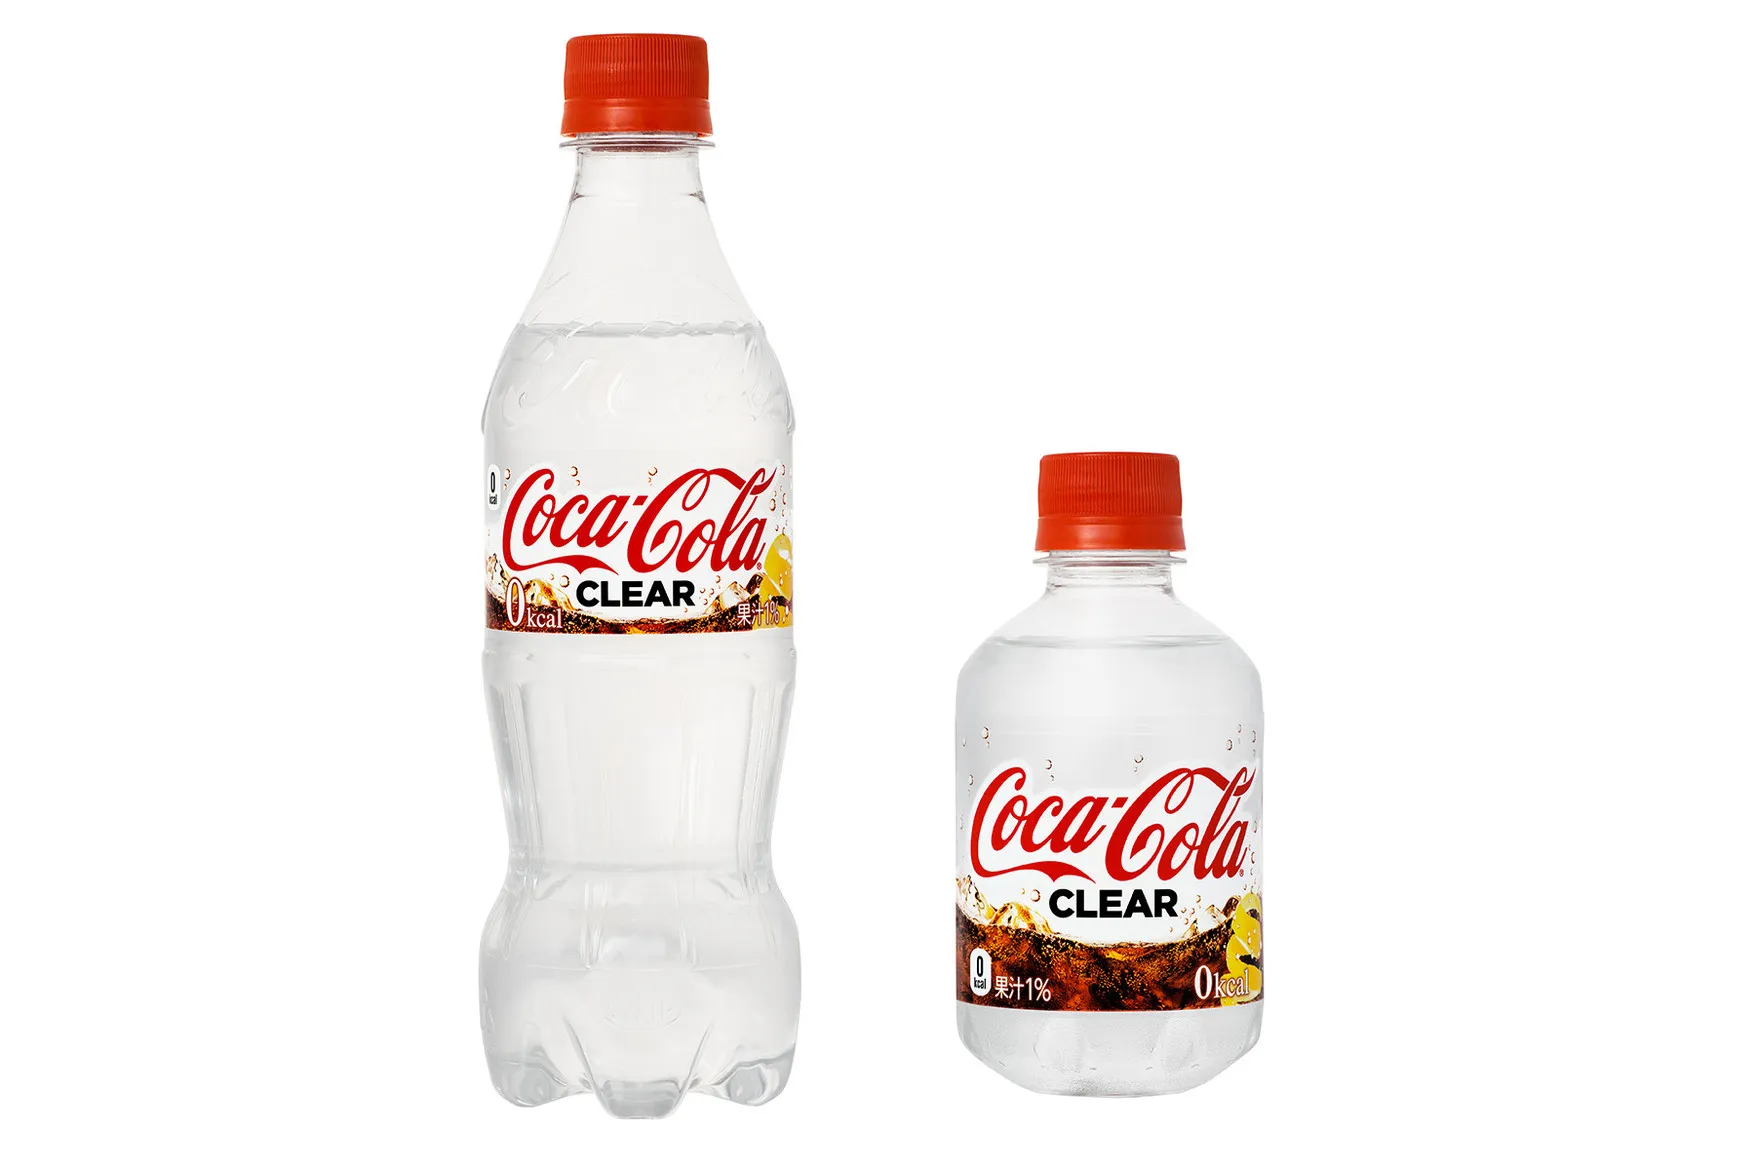 https 2f2fhypebeastcom2fimage2f20182f062fcoca cola clear japan release 1